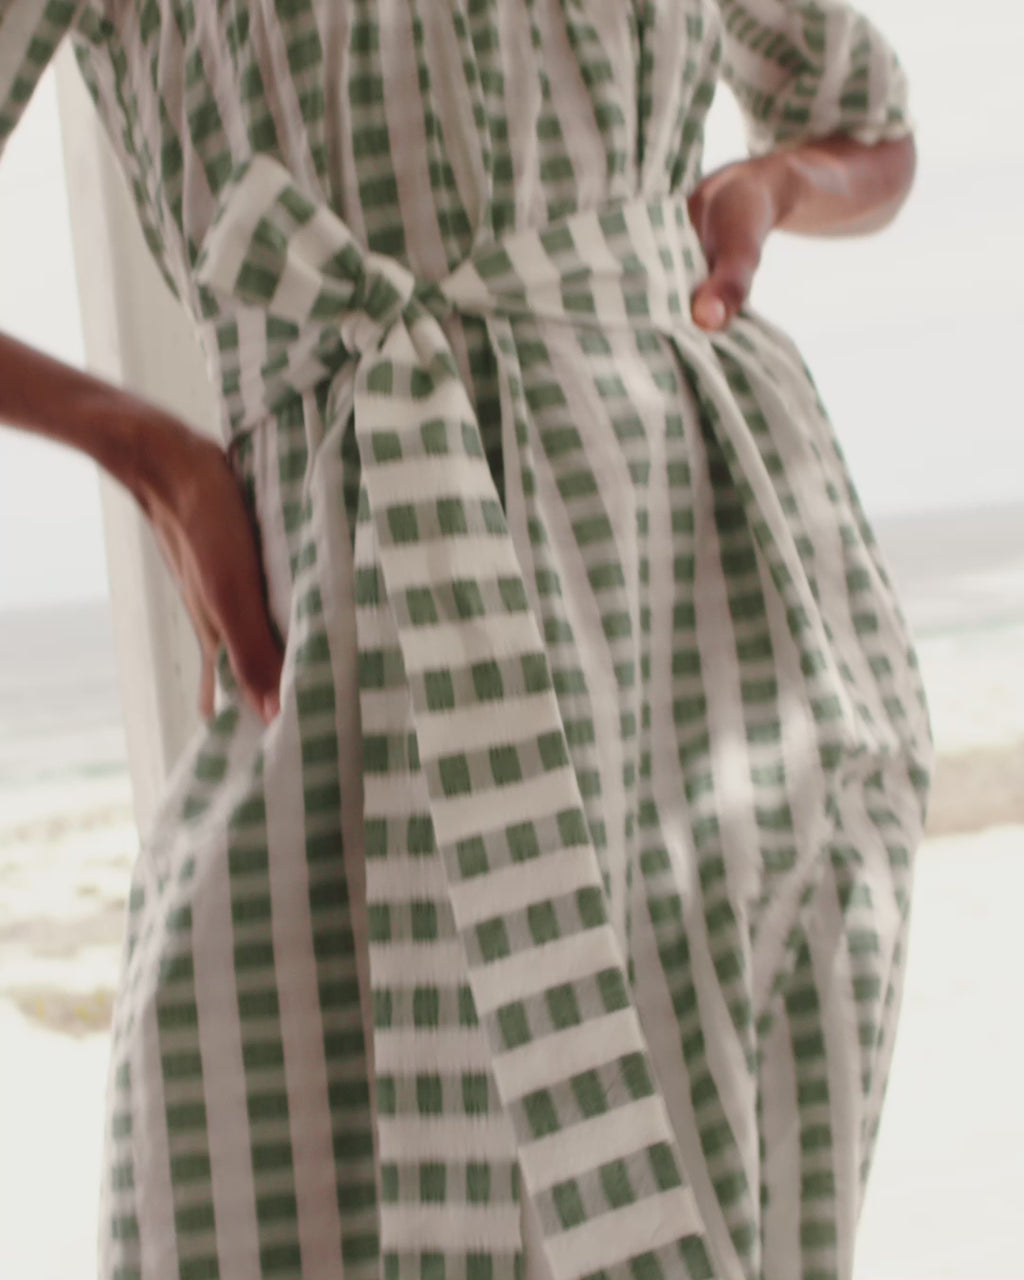 Wiggy Kit | Bastide Dress | Model wearing green and white gingham dress with beach in background